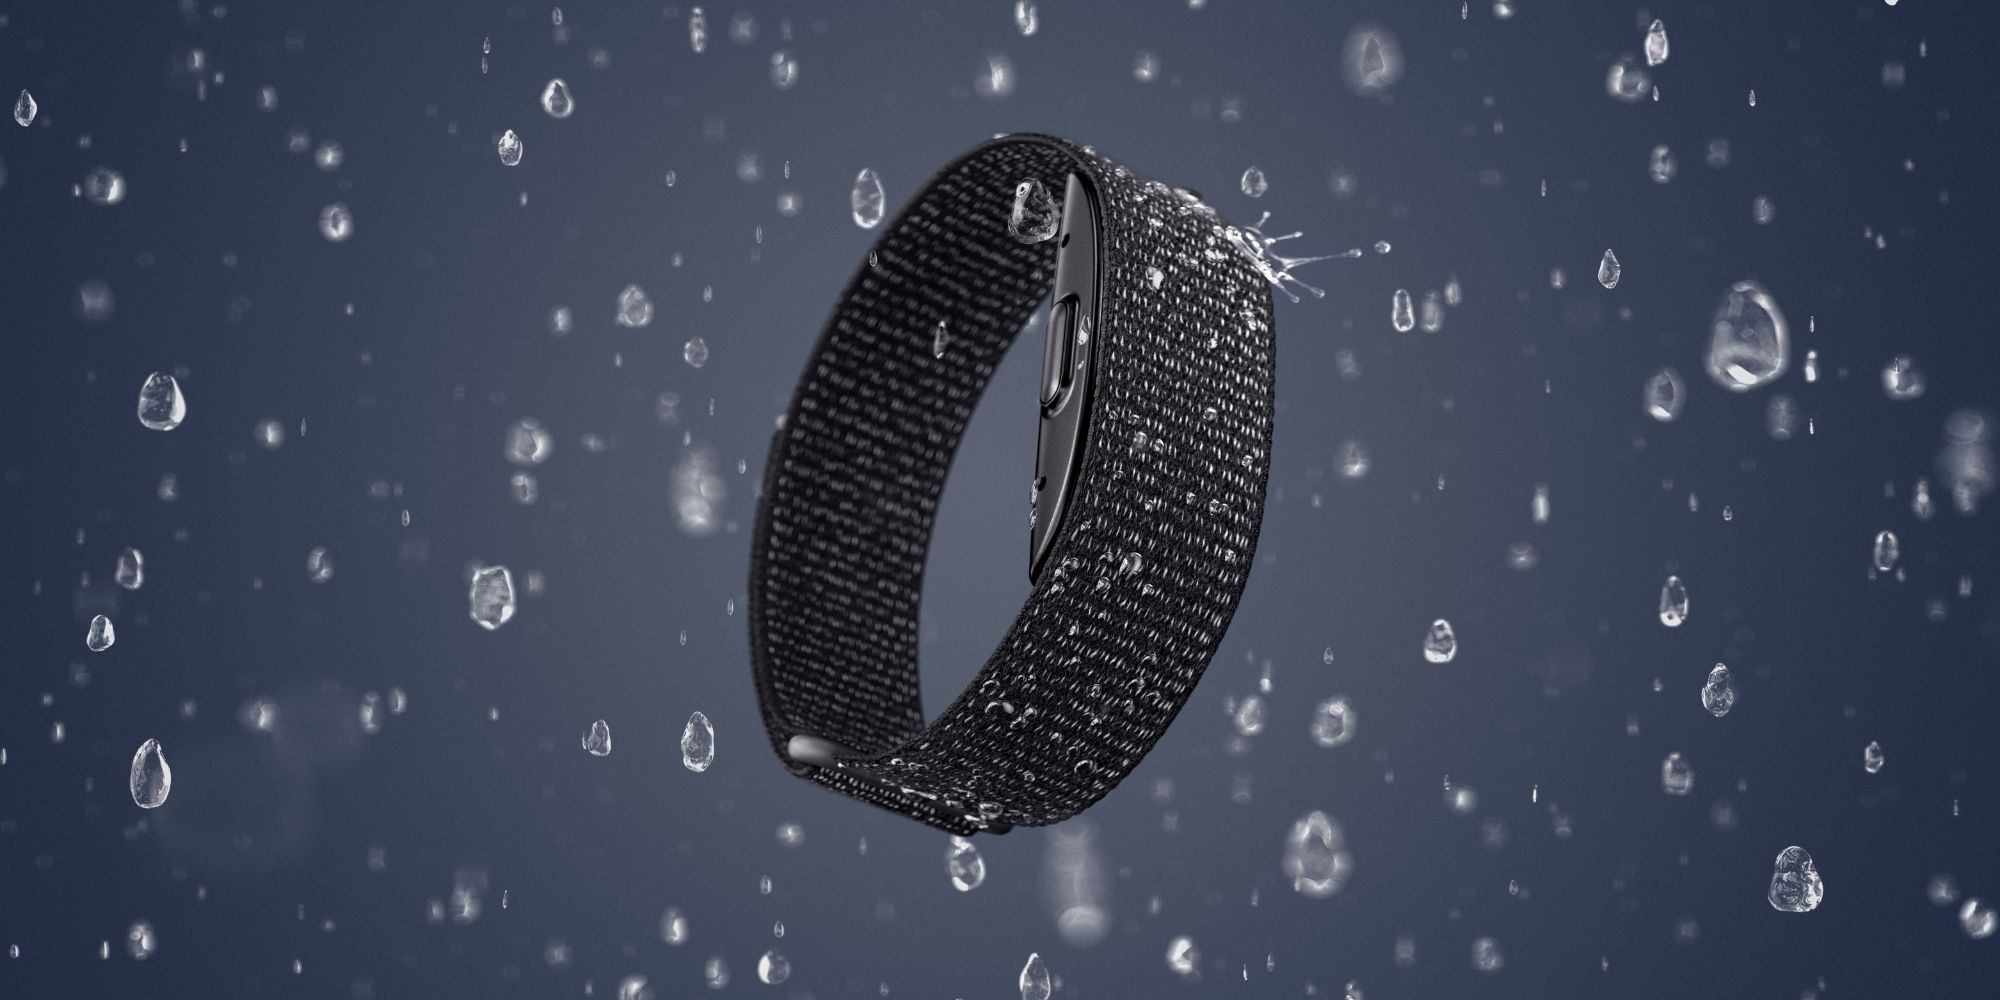 Amazon Halo Band amidst a bunch of water drops